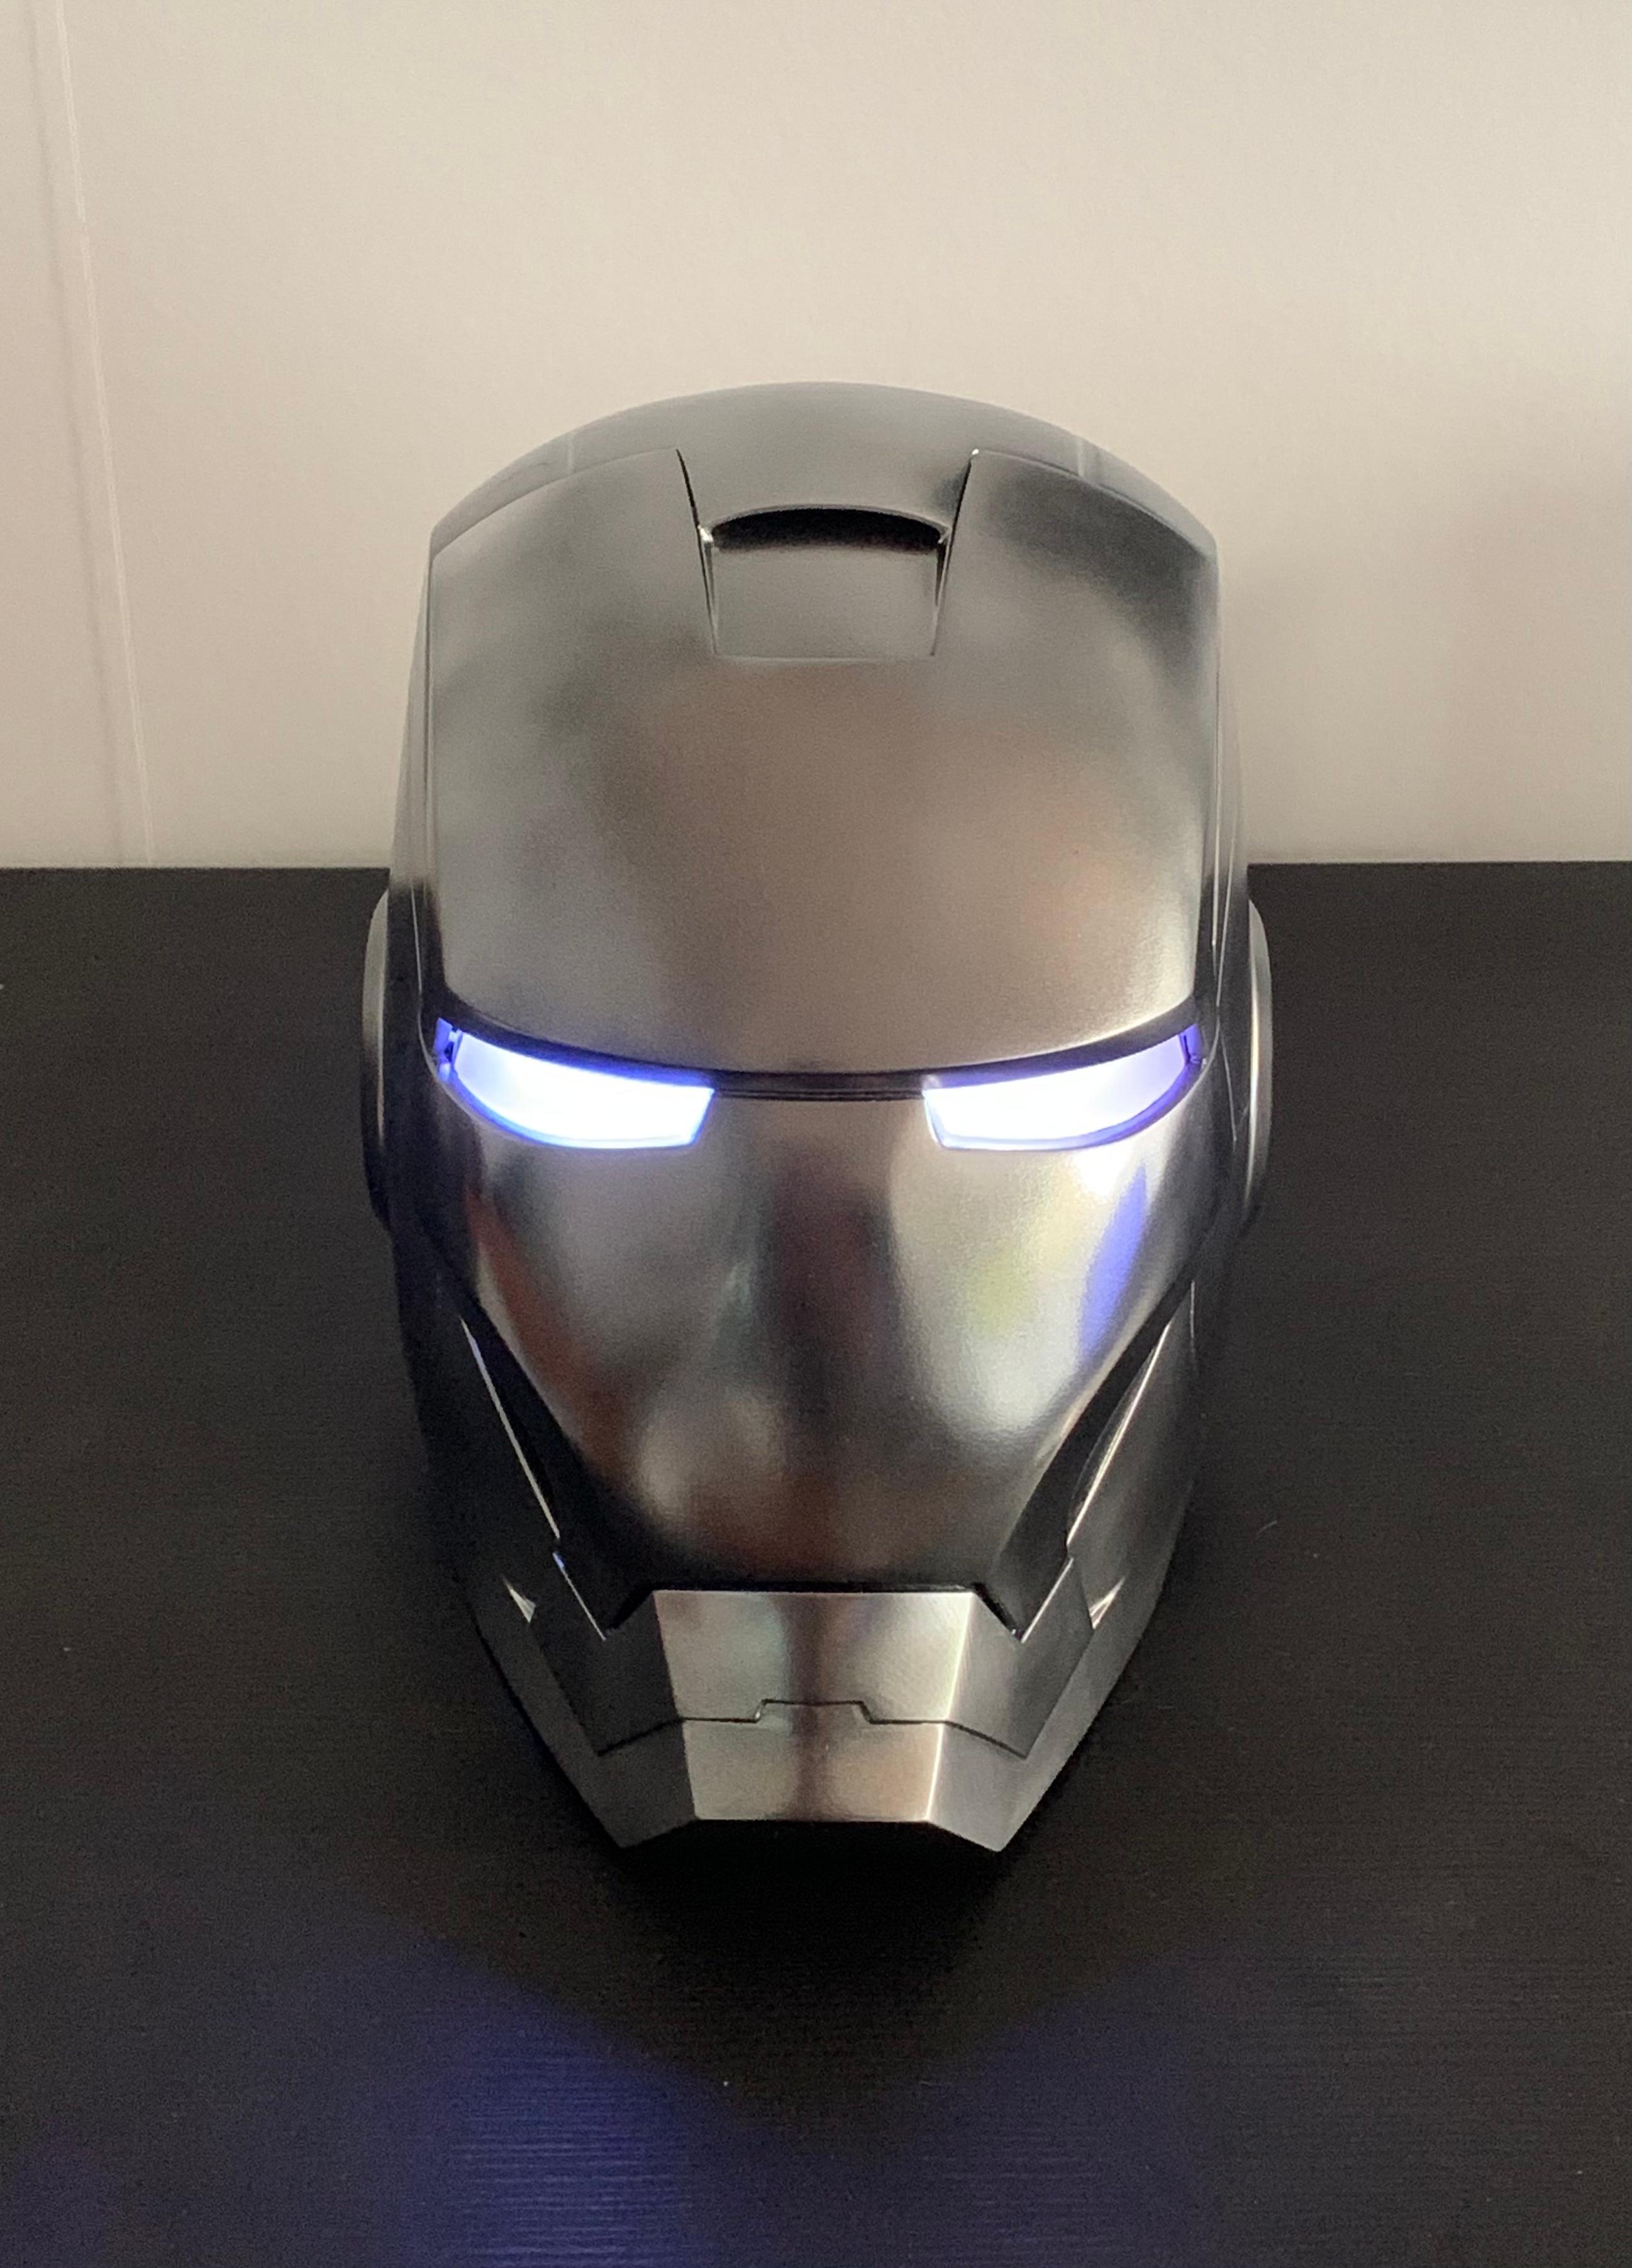 Iron Man Helmet - Finished prop from this model - 3d model